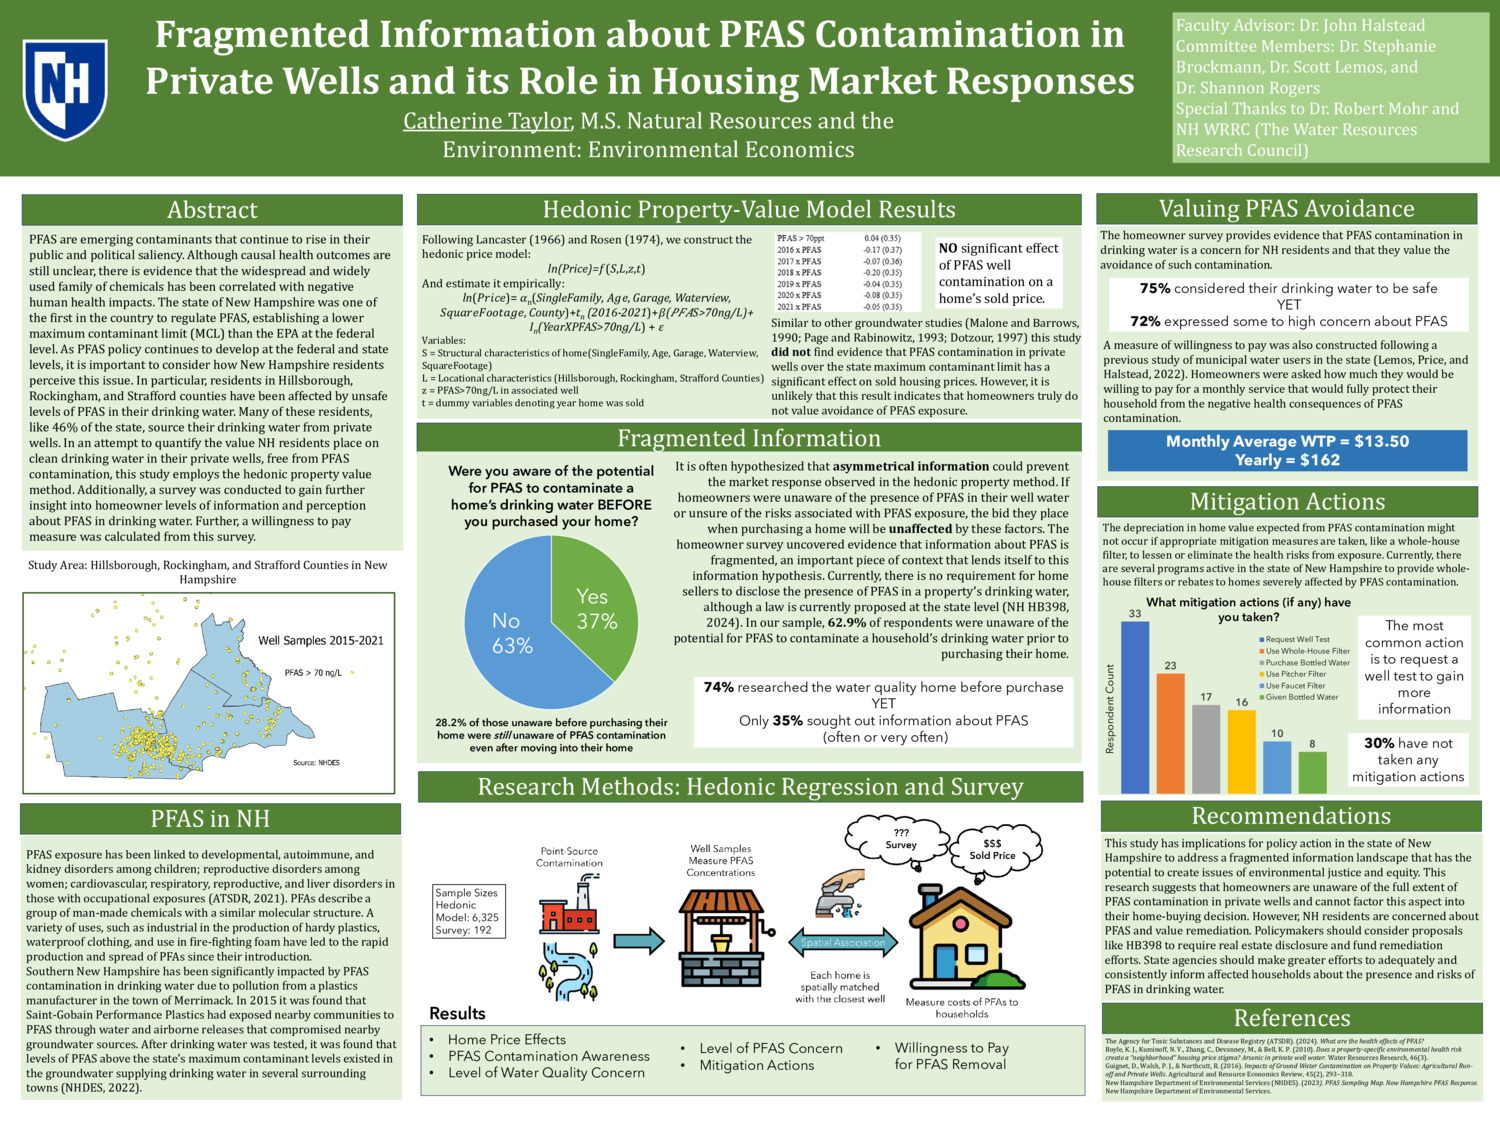 Fragmented Information About Pfas Contamination In Private Wells And Its Role In Housing Market Responses by cat1043